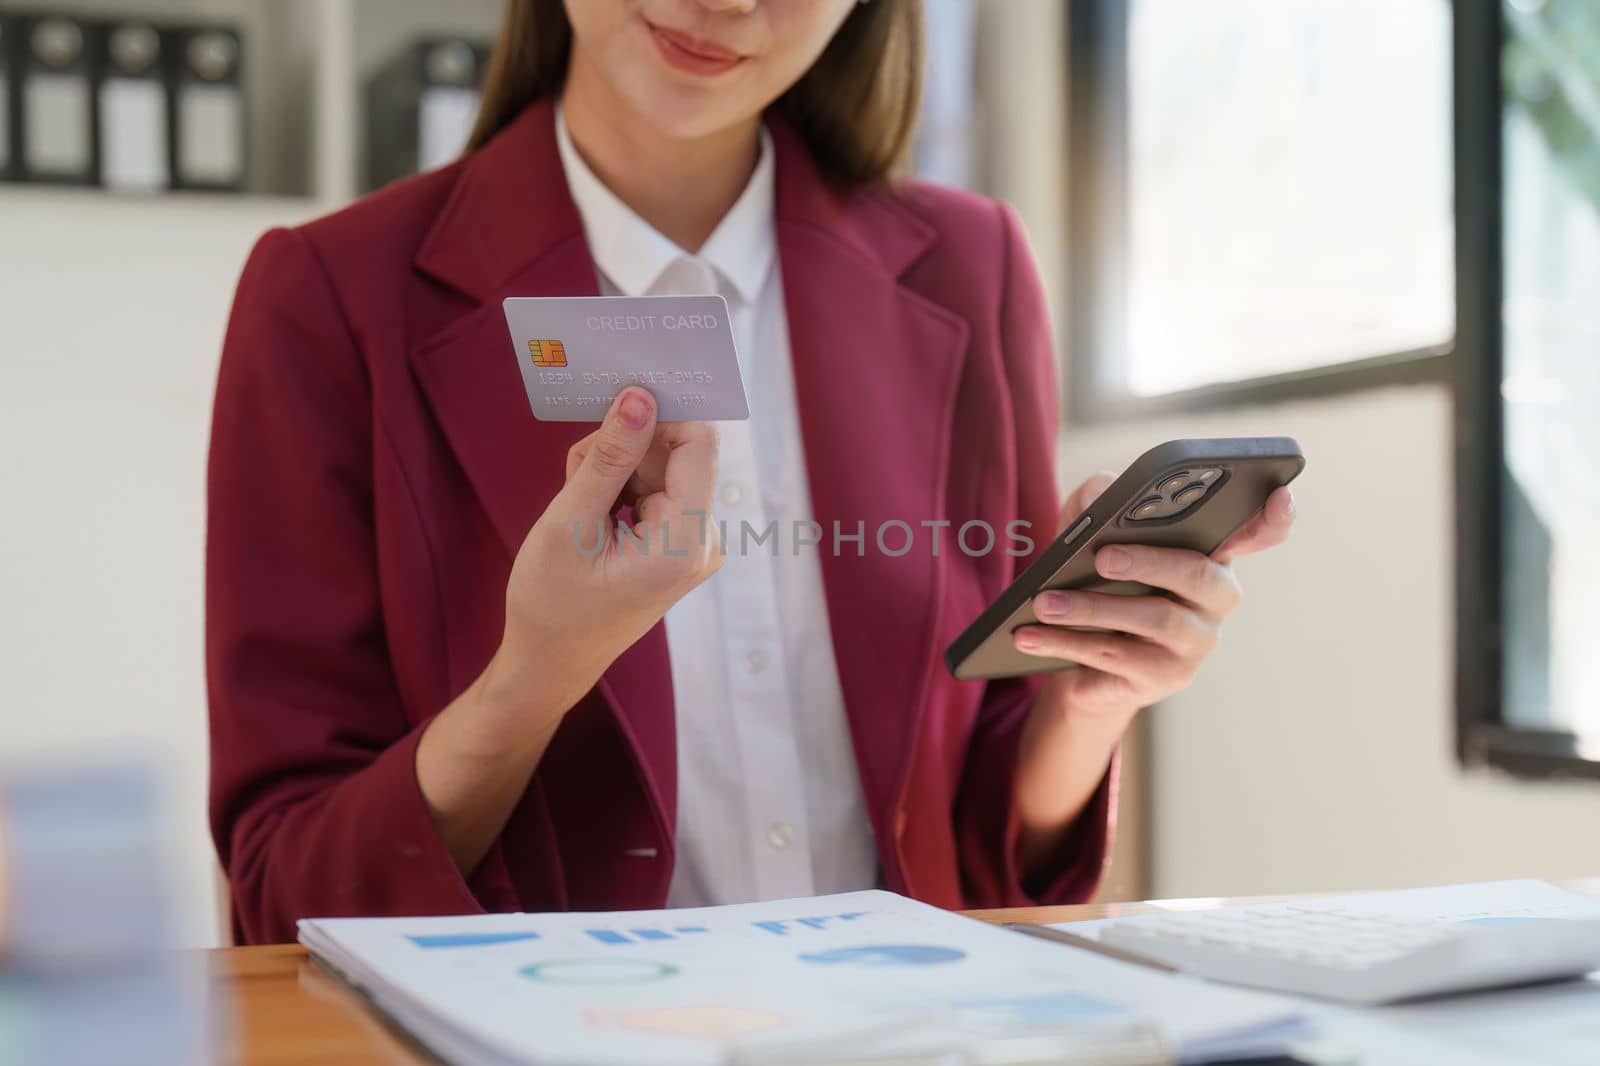 Asian woman using smartphone and credit card for online shopping. E-payment technology, shopaholic lifestyle, mobile phone financial application concept